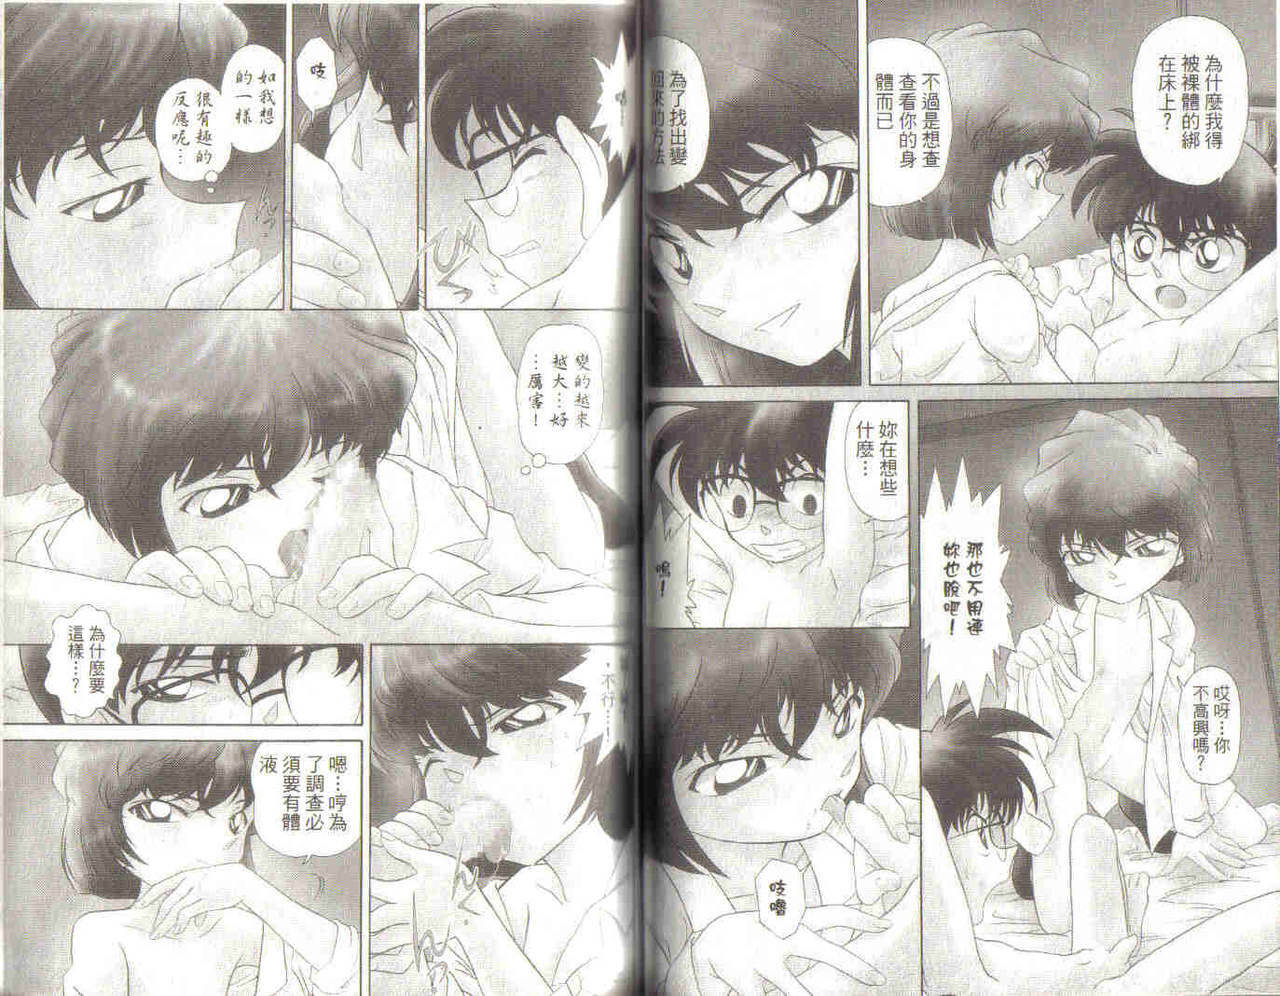 [Ooya Nako] Detective Assistant Vol. 3 (Detective Conan) [Chinese] page 41 full